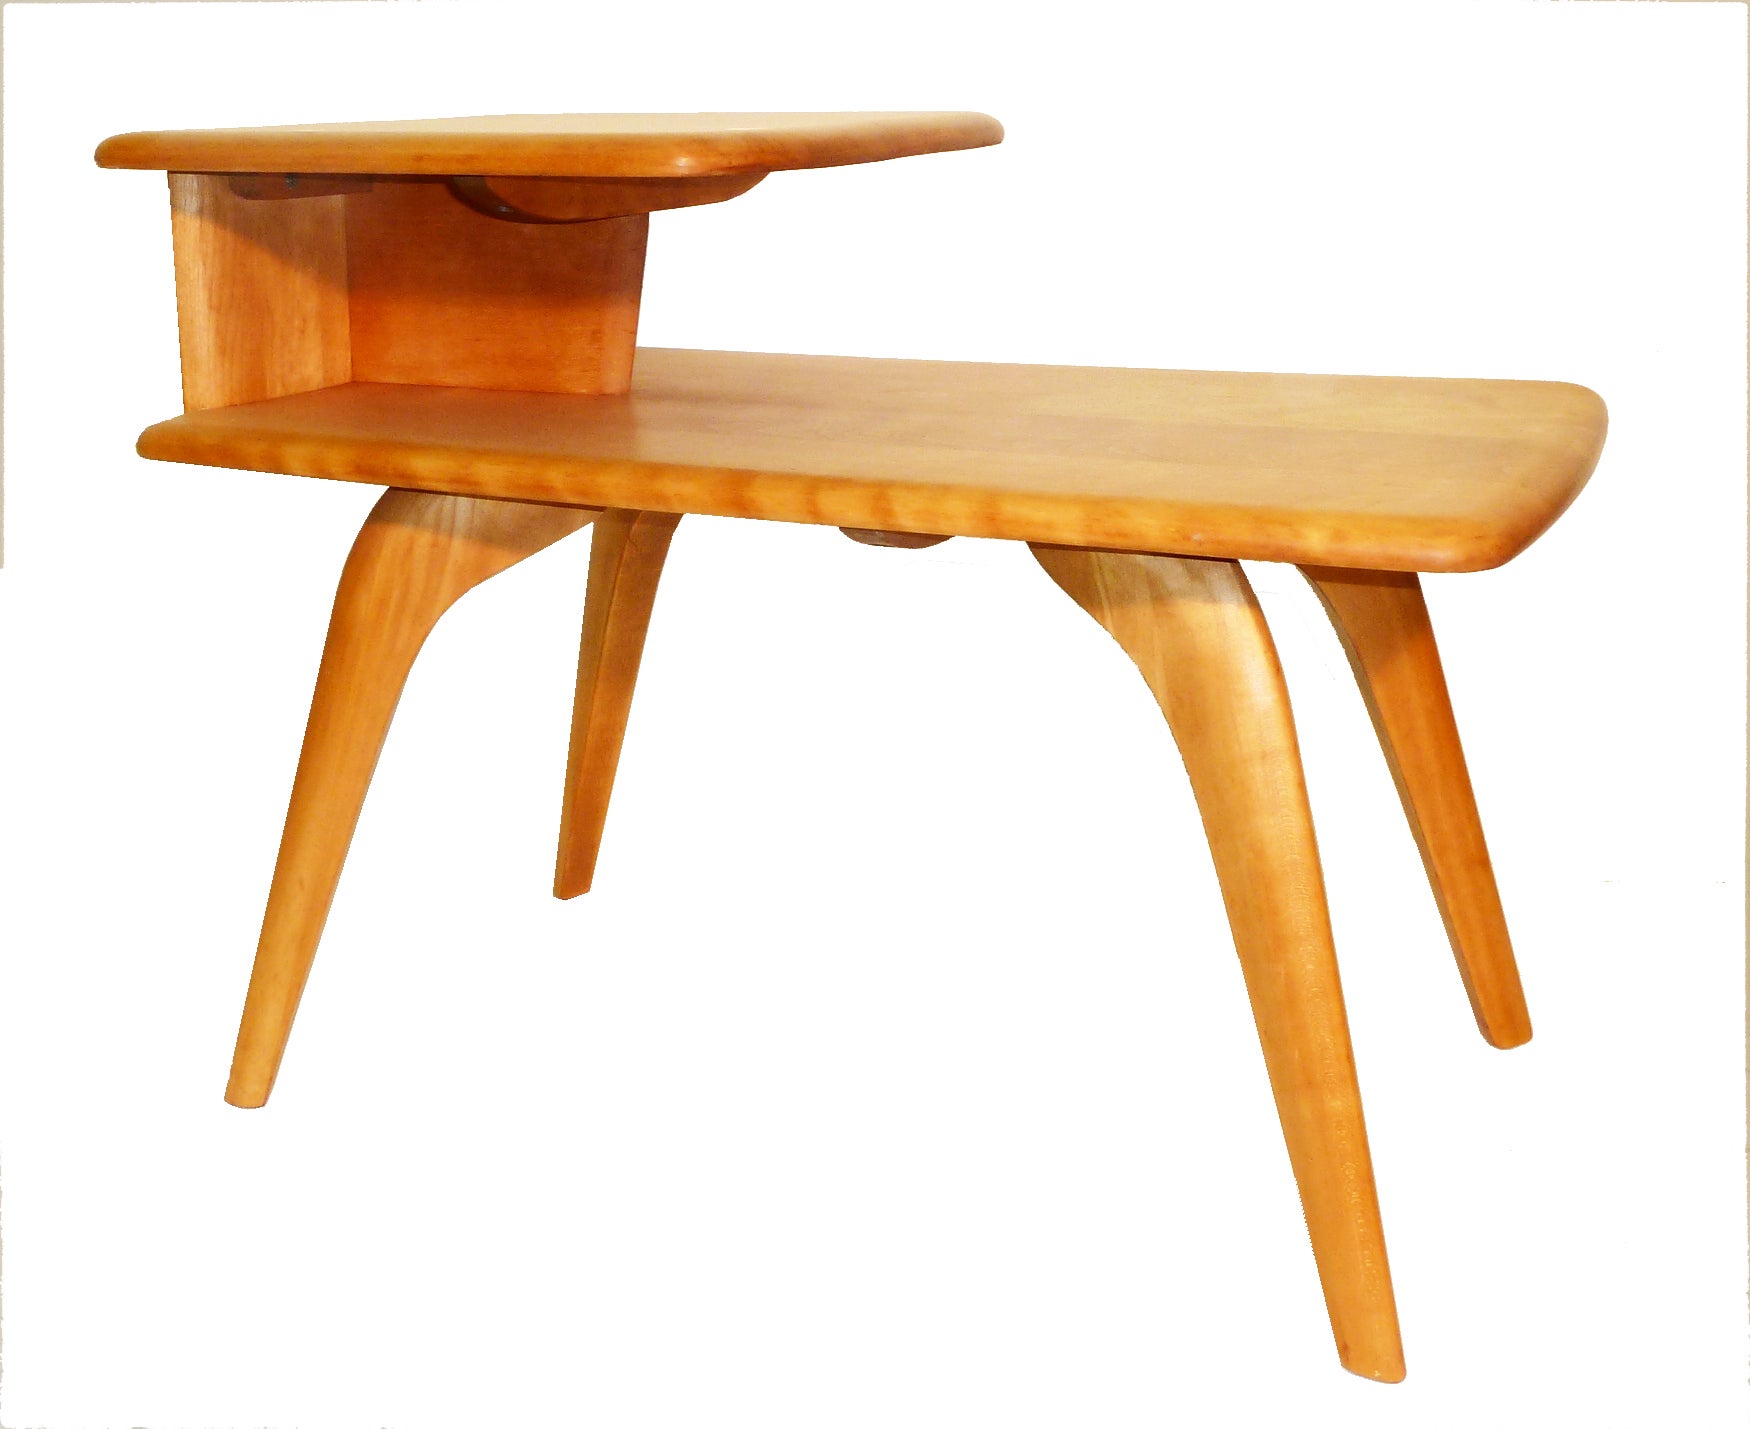 Mid-Century Modern Two-Tier Tables by Heywood Wakefield, Pair